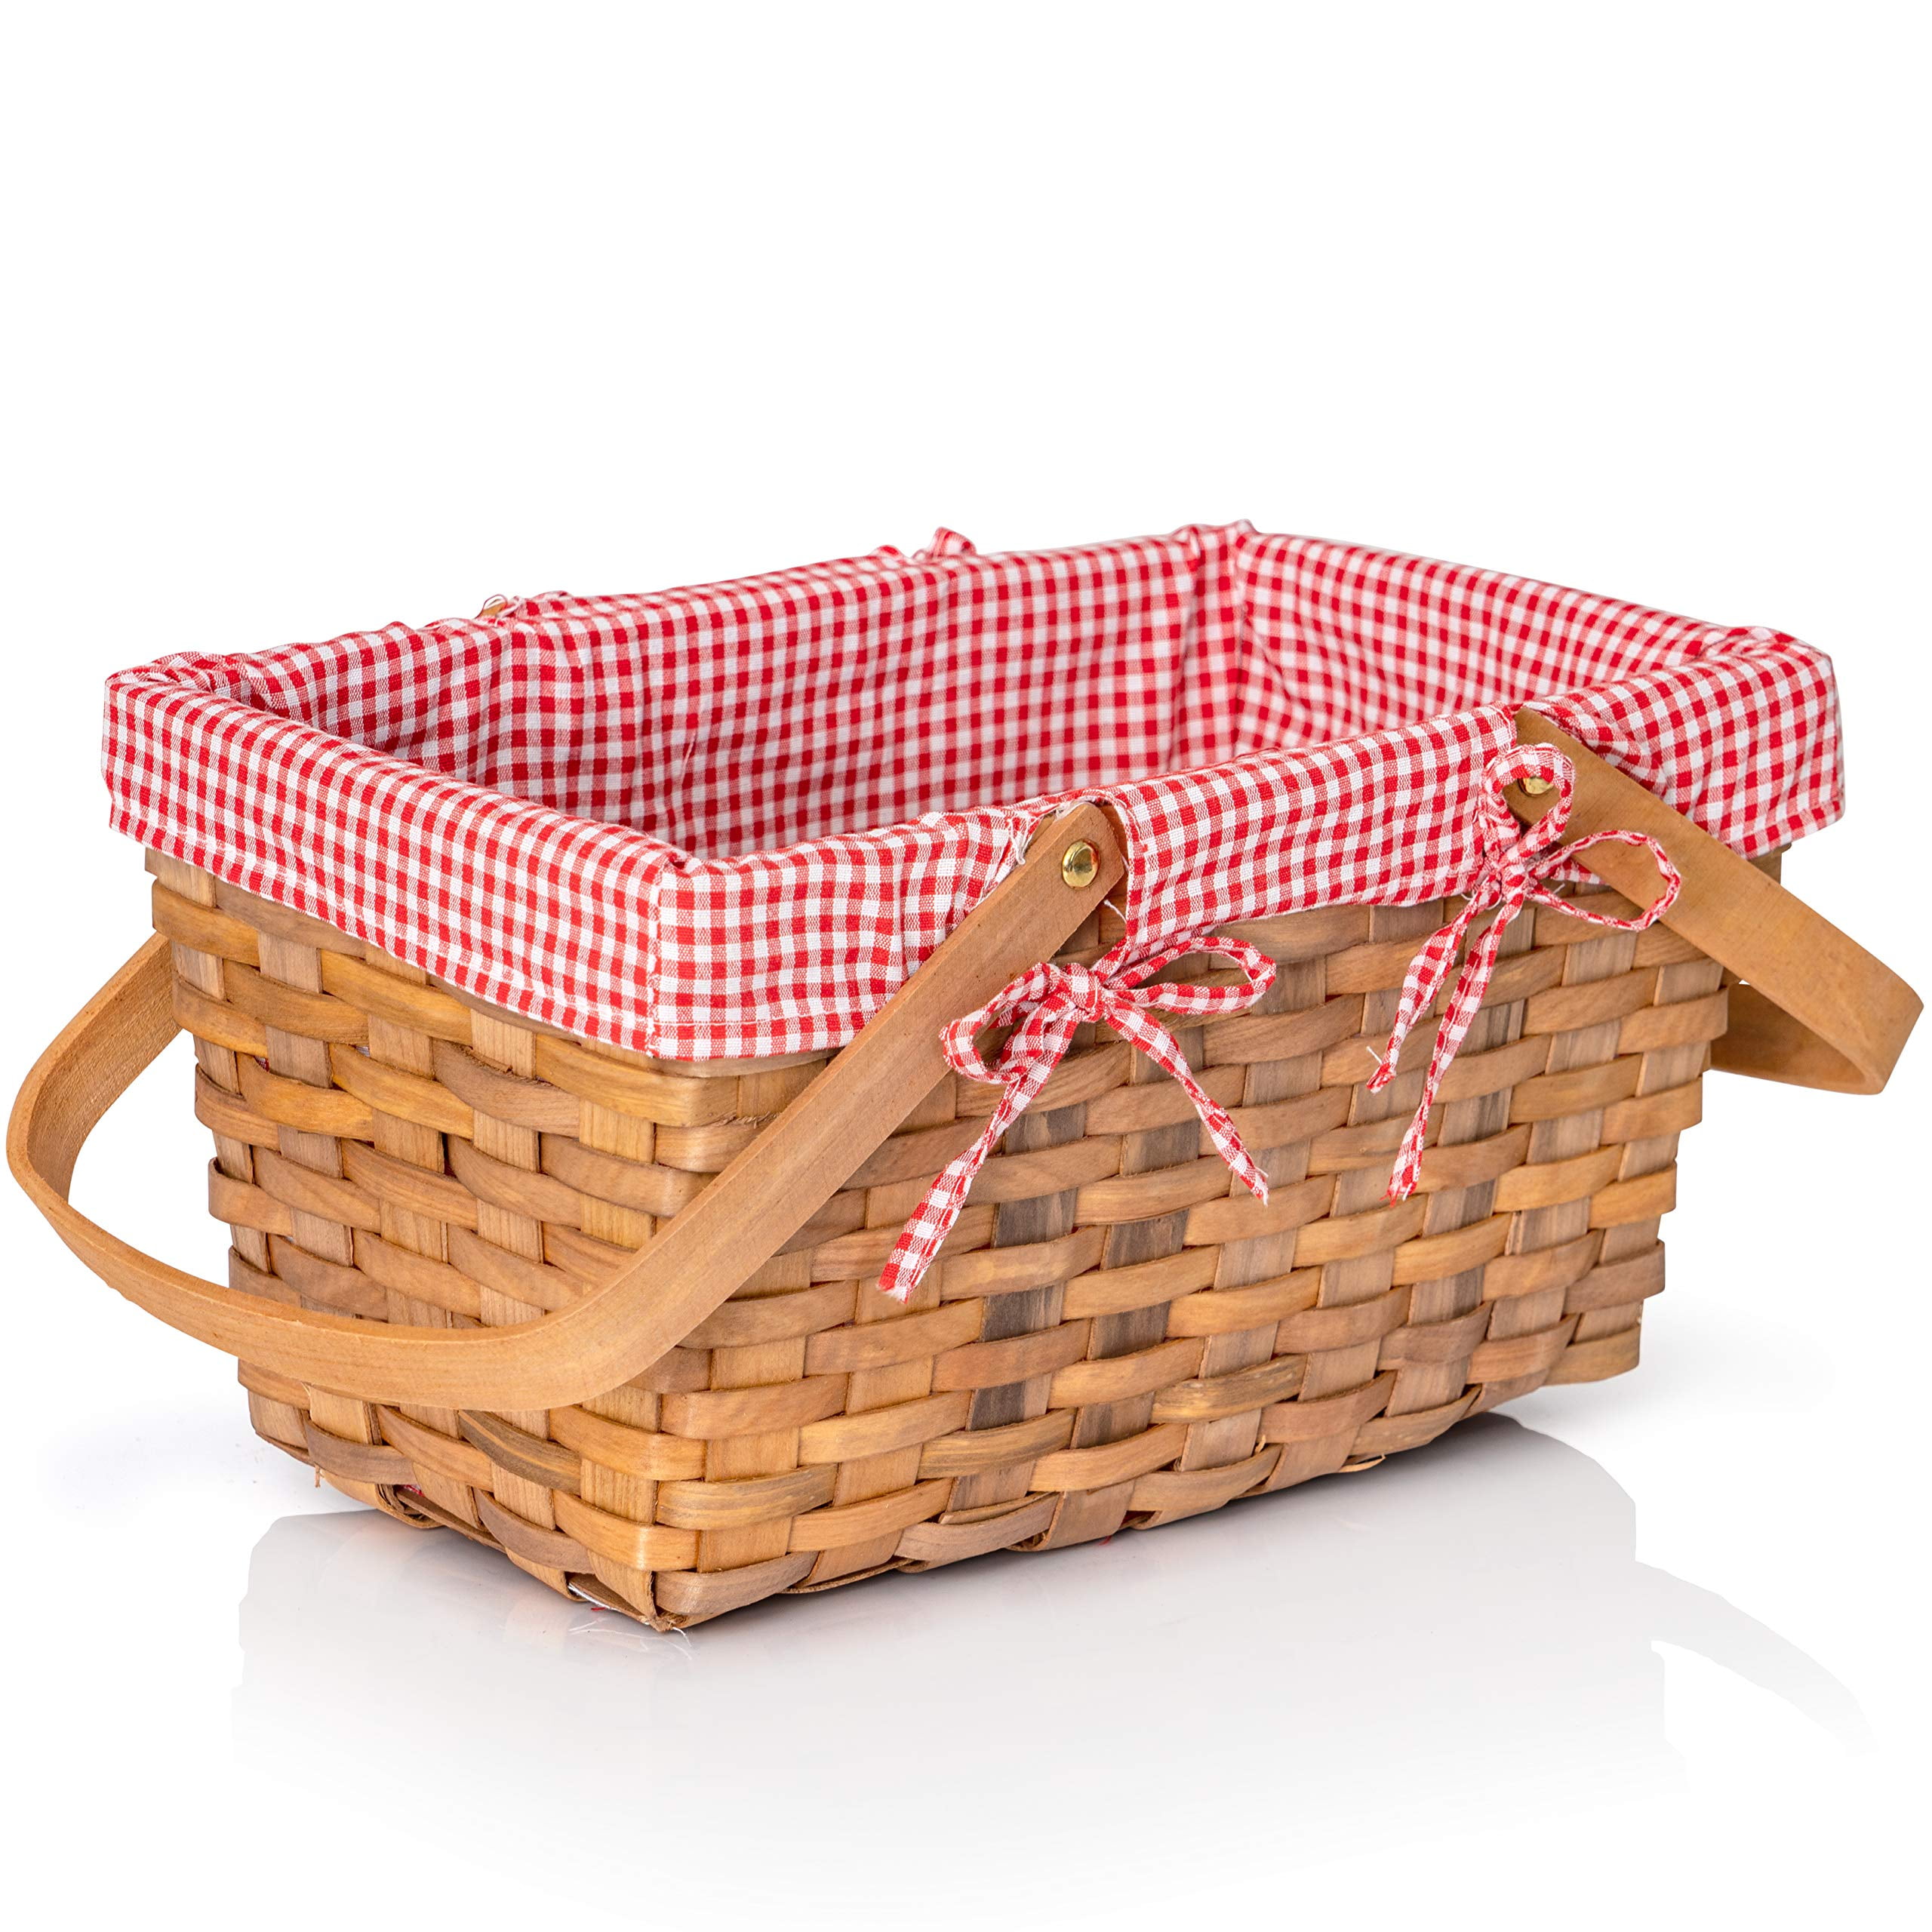 Willow Basket Oblong Red Gingham Lining 